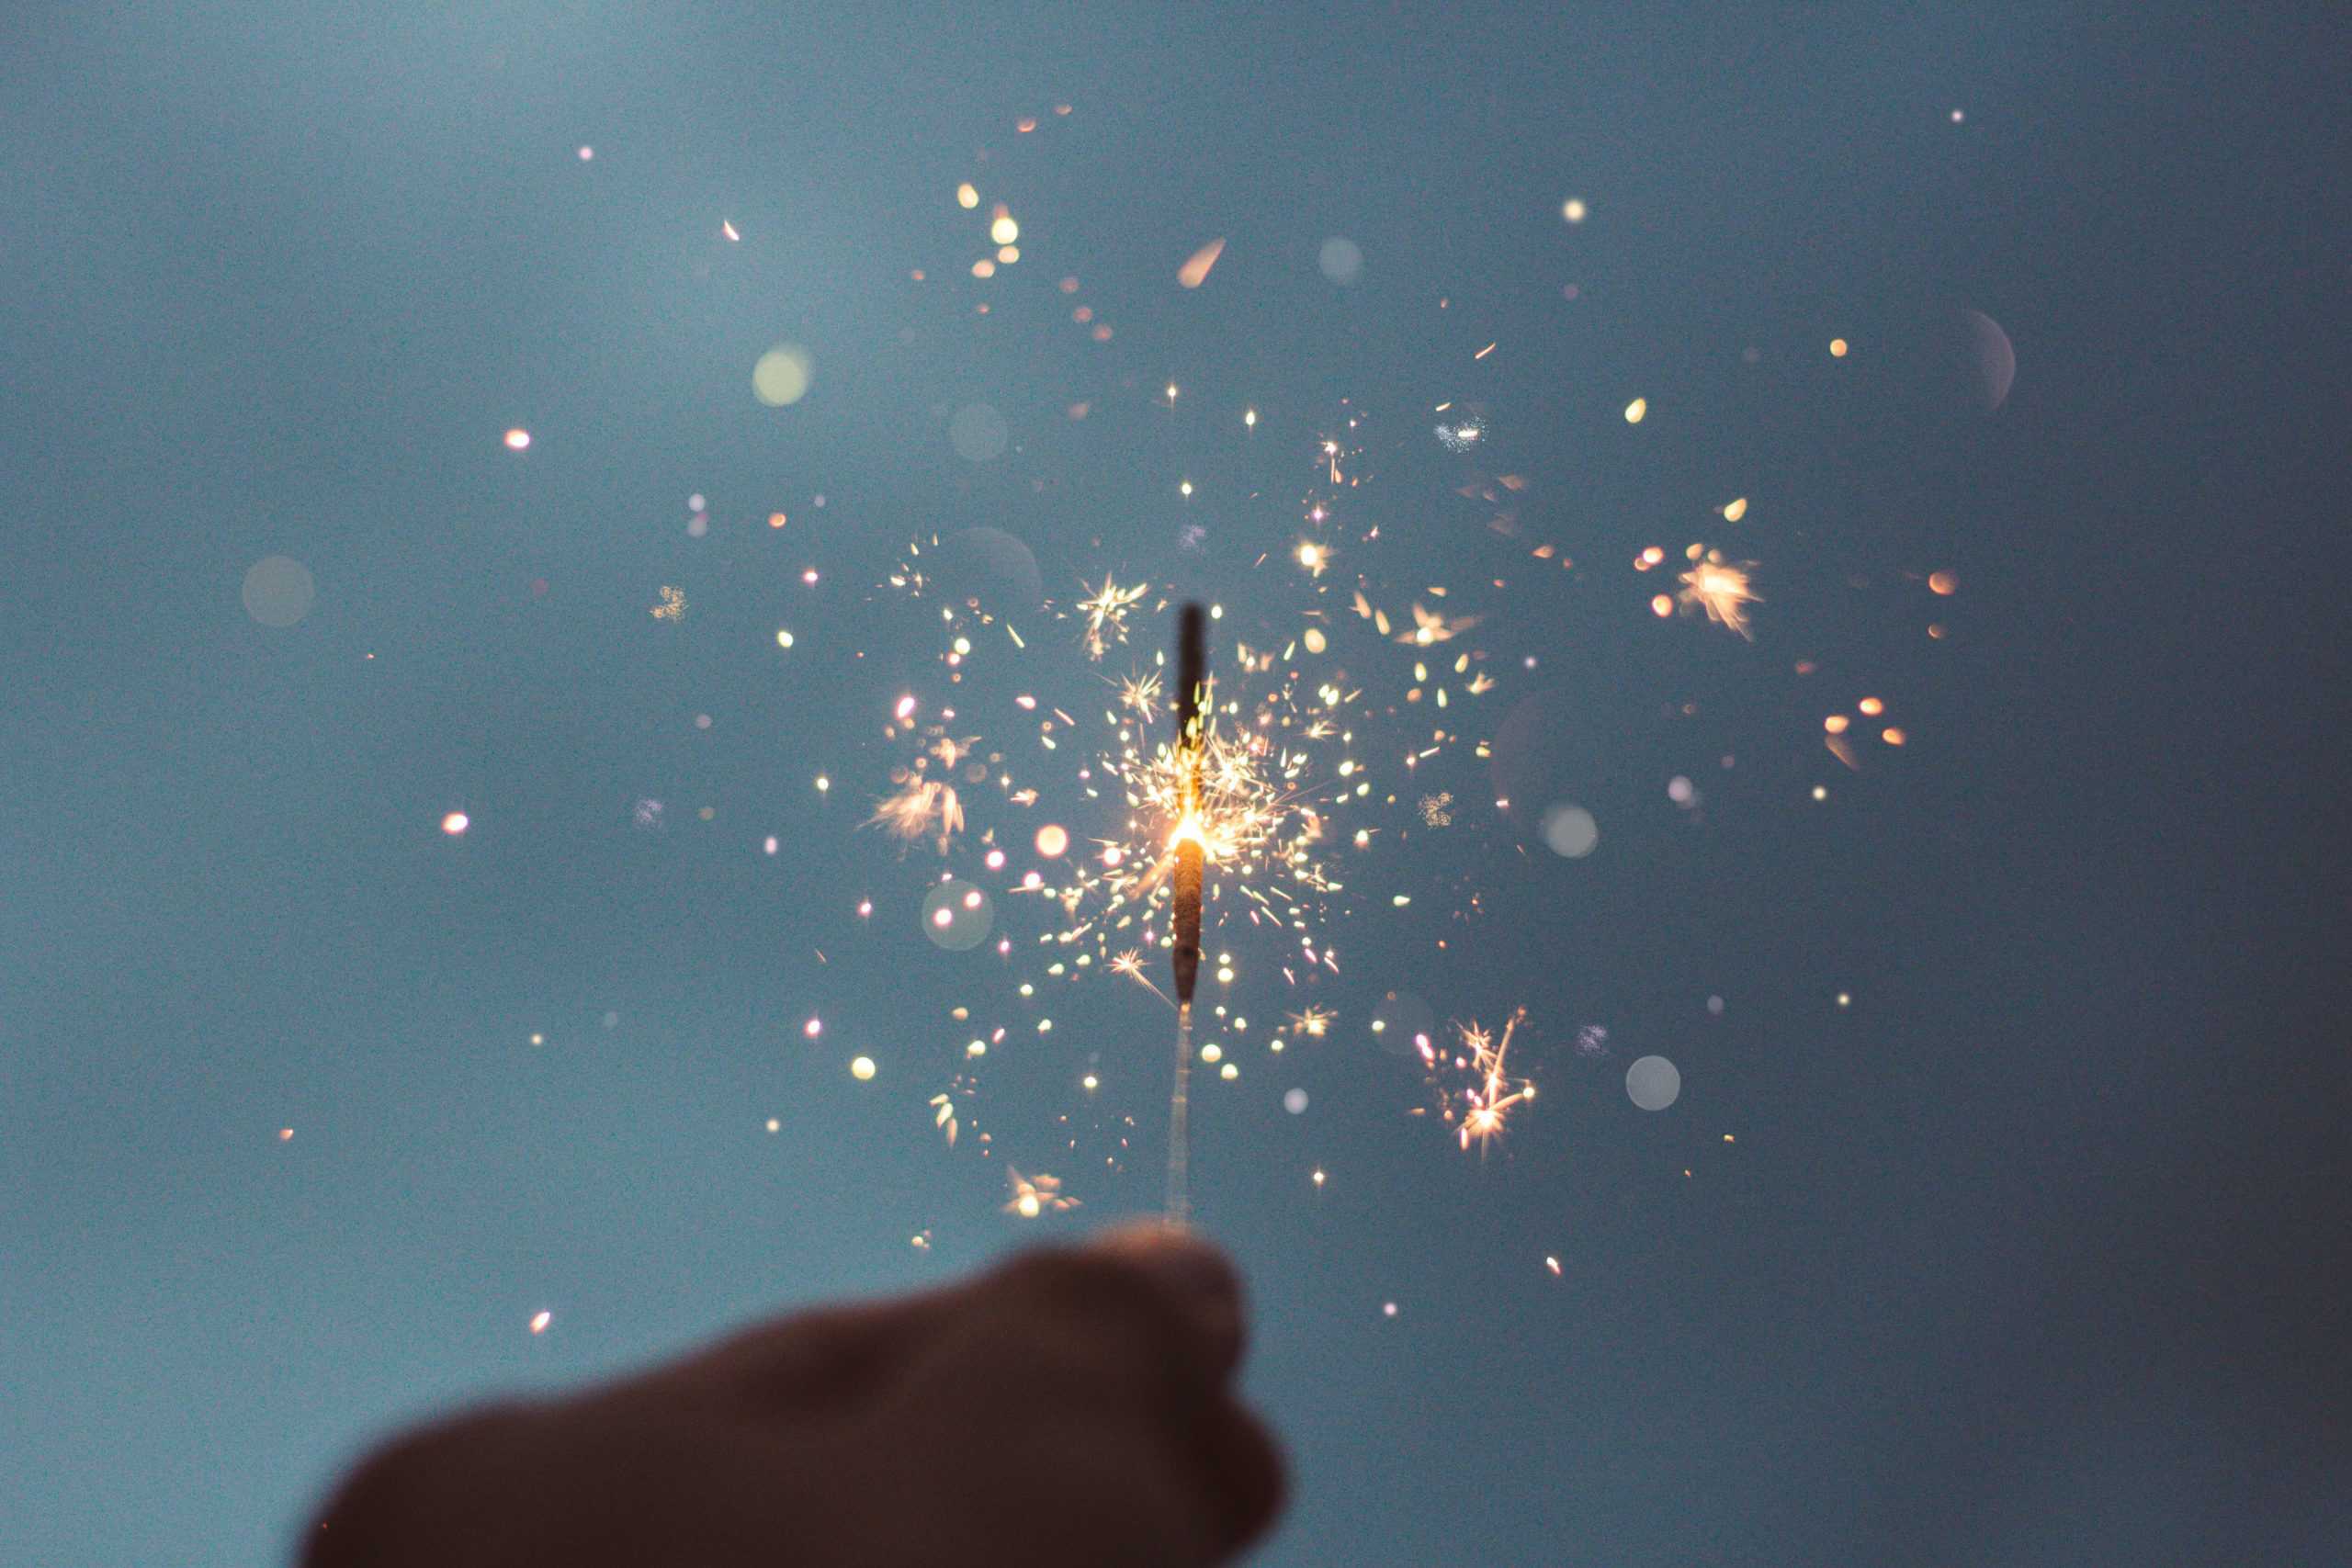 celebrating non-diet goals for the new year by lighting a sparkler